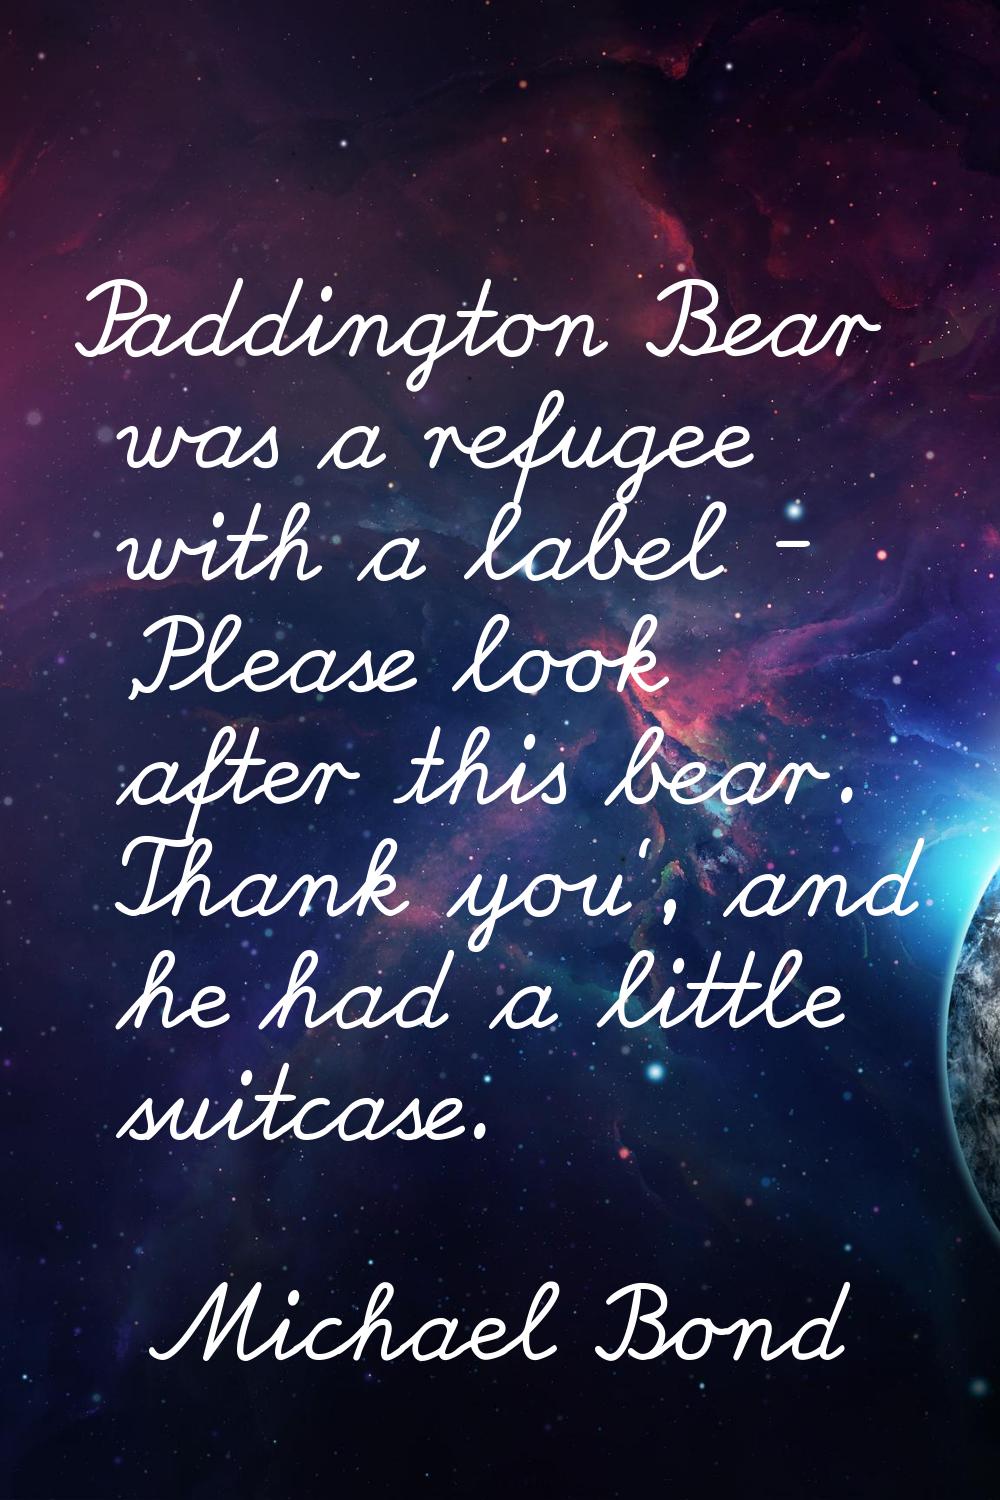 Paddington Bear was a refugee with a label - 'Please look after this bear. Thank you', and he had a